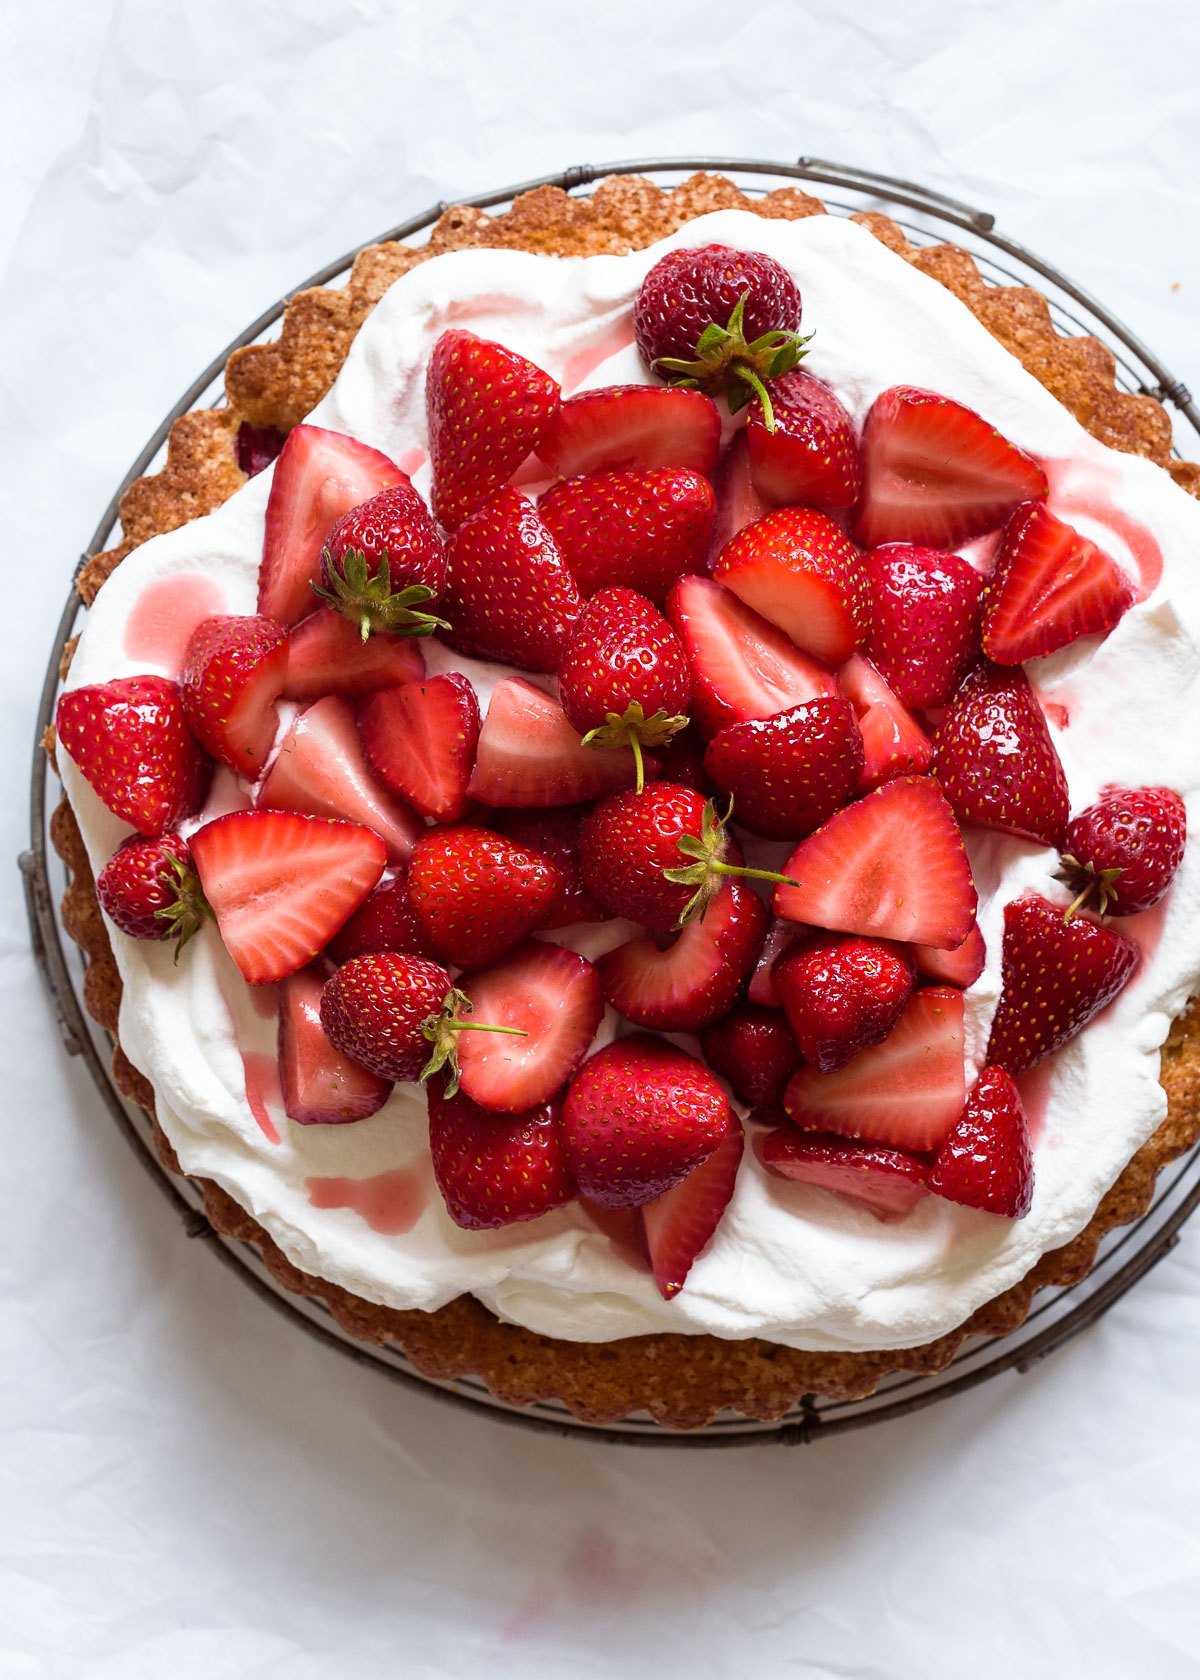 A strawberry almond buttermilk cake with whipped cream and macerated strawberries on a white background.